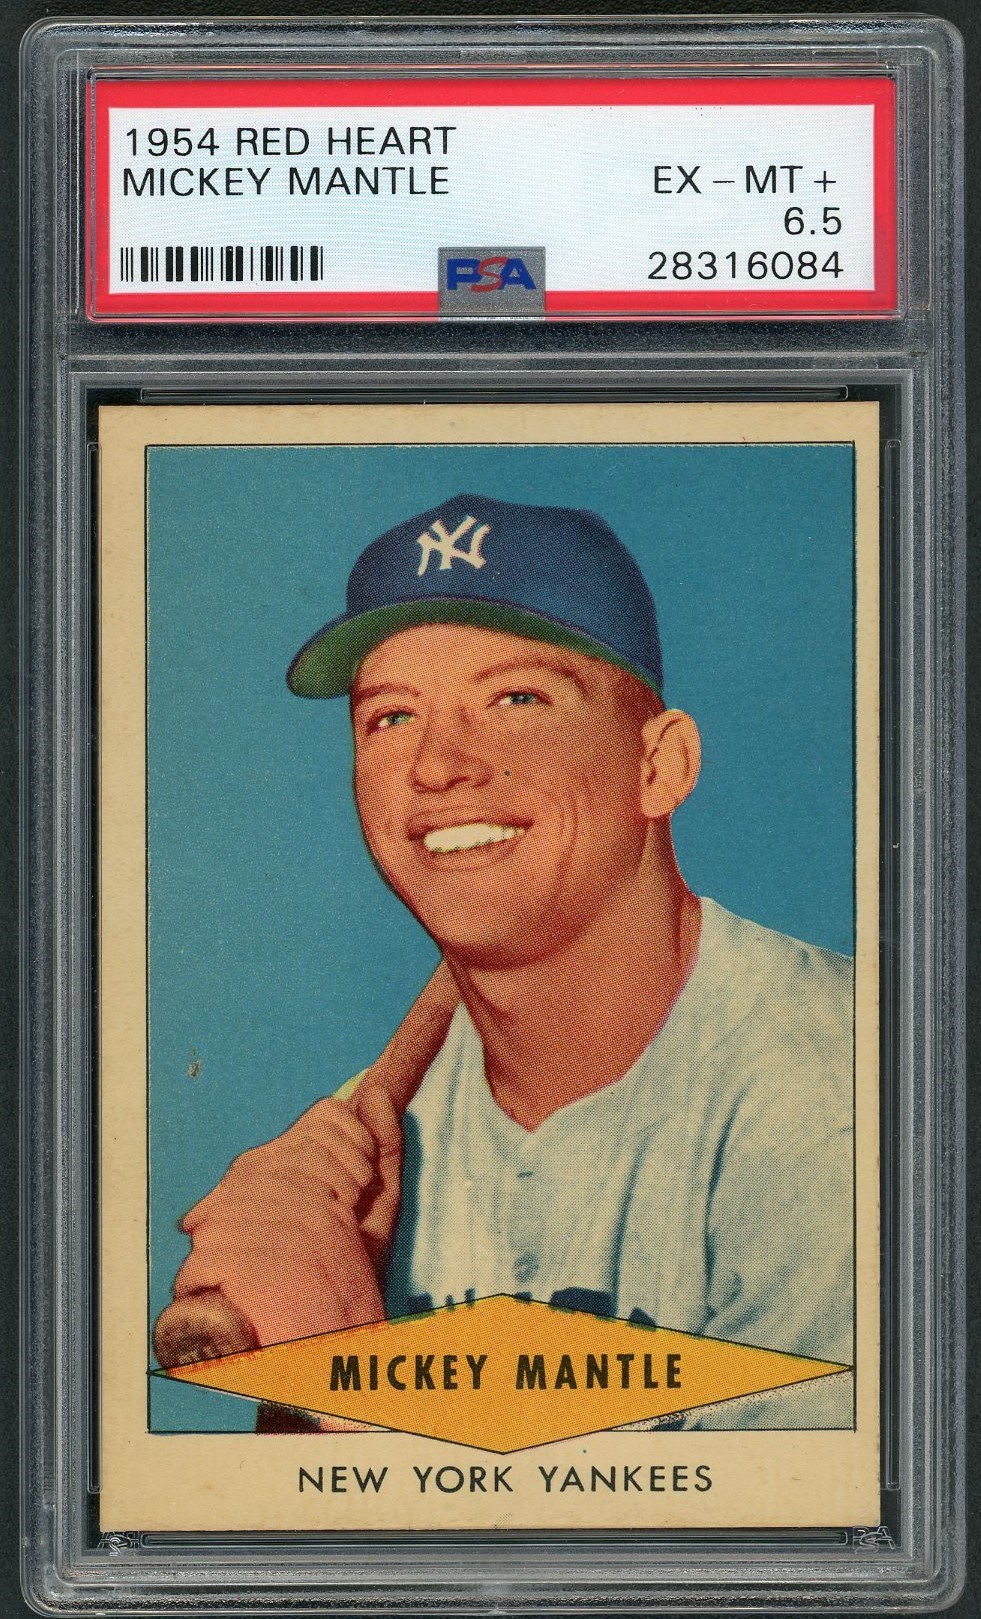 Baseball and Trading Cards - 1954 Red Heart Mickey Mantle - PSA EX-MT+ 6.5